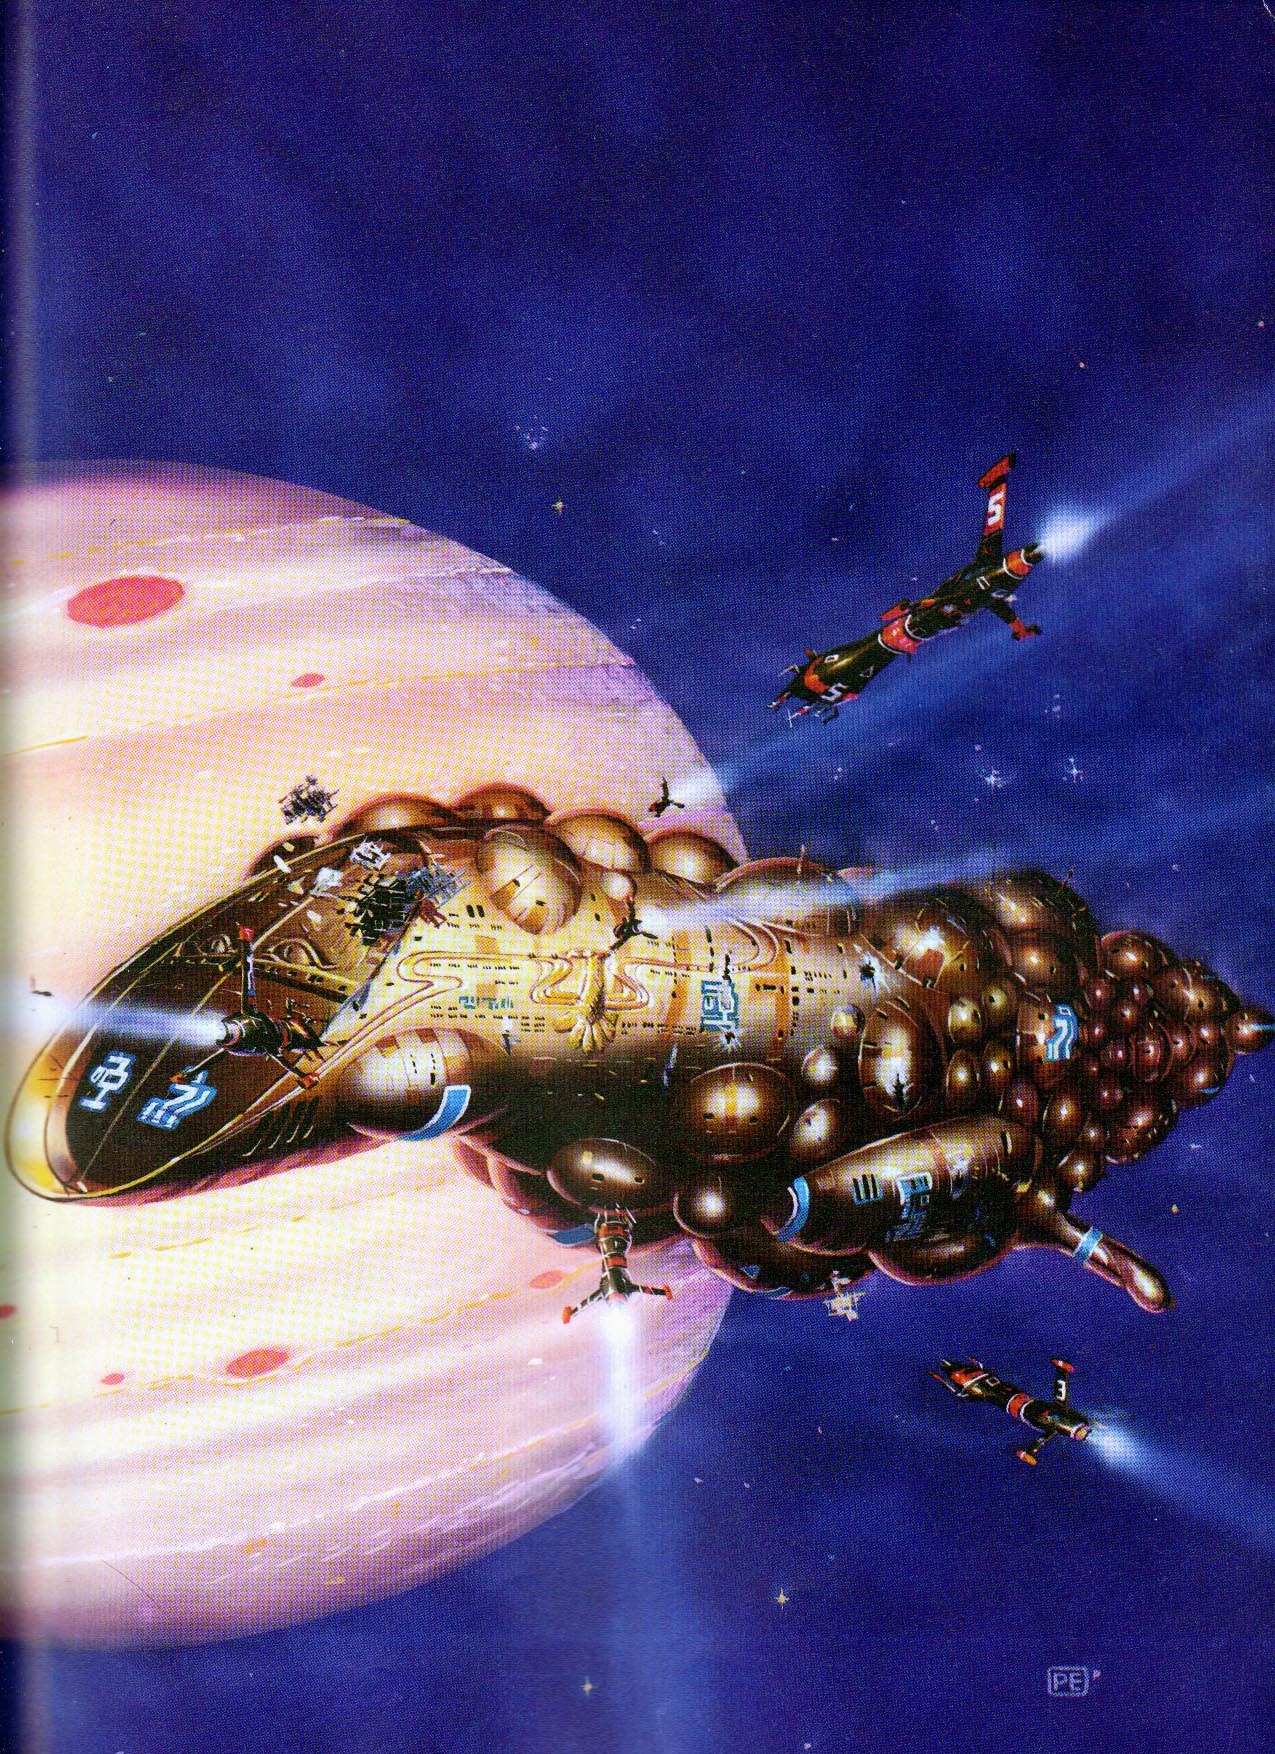 Peter Elson, from Stewart Cowley’s 1979 art collection Spacewreck